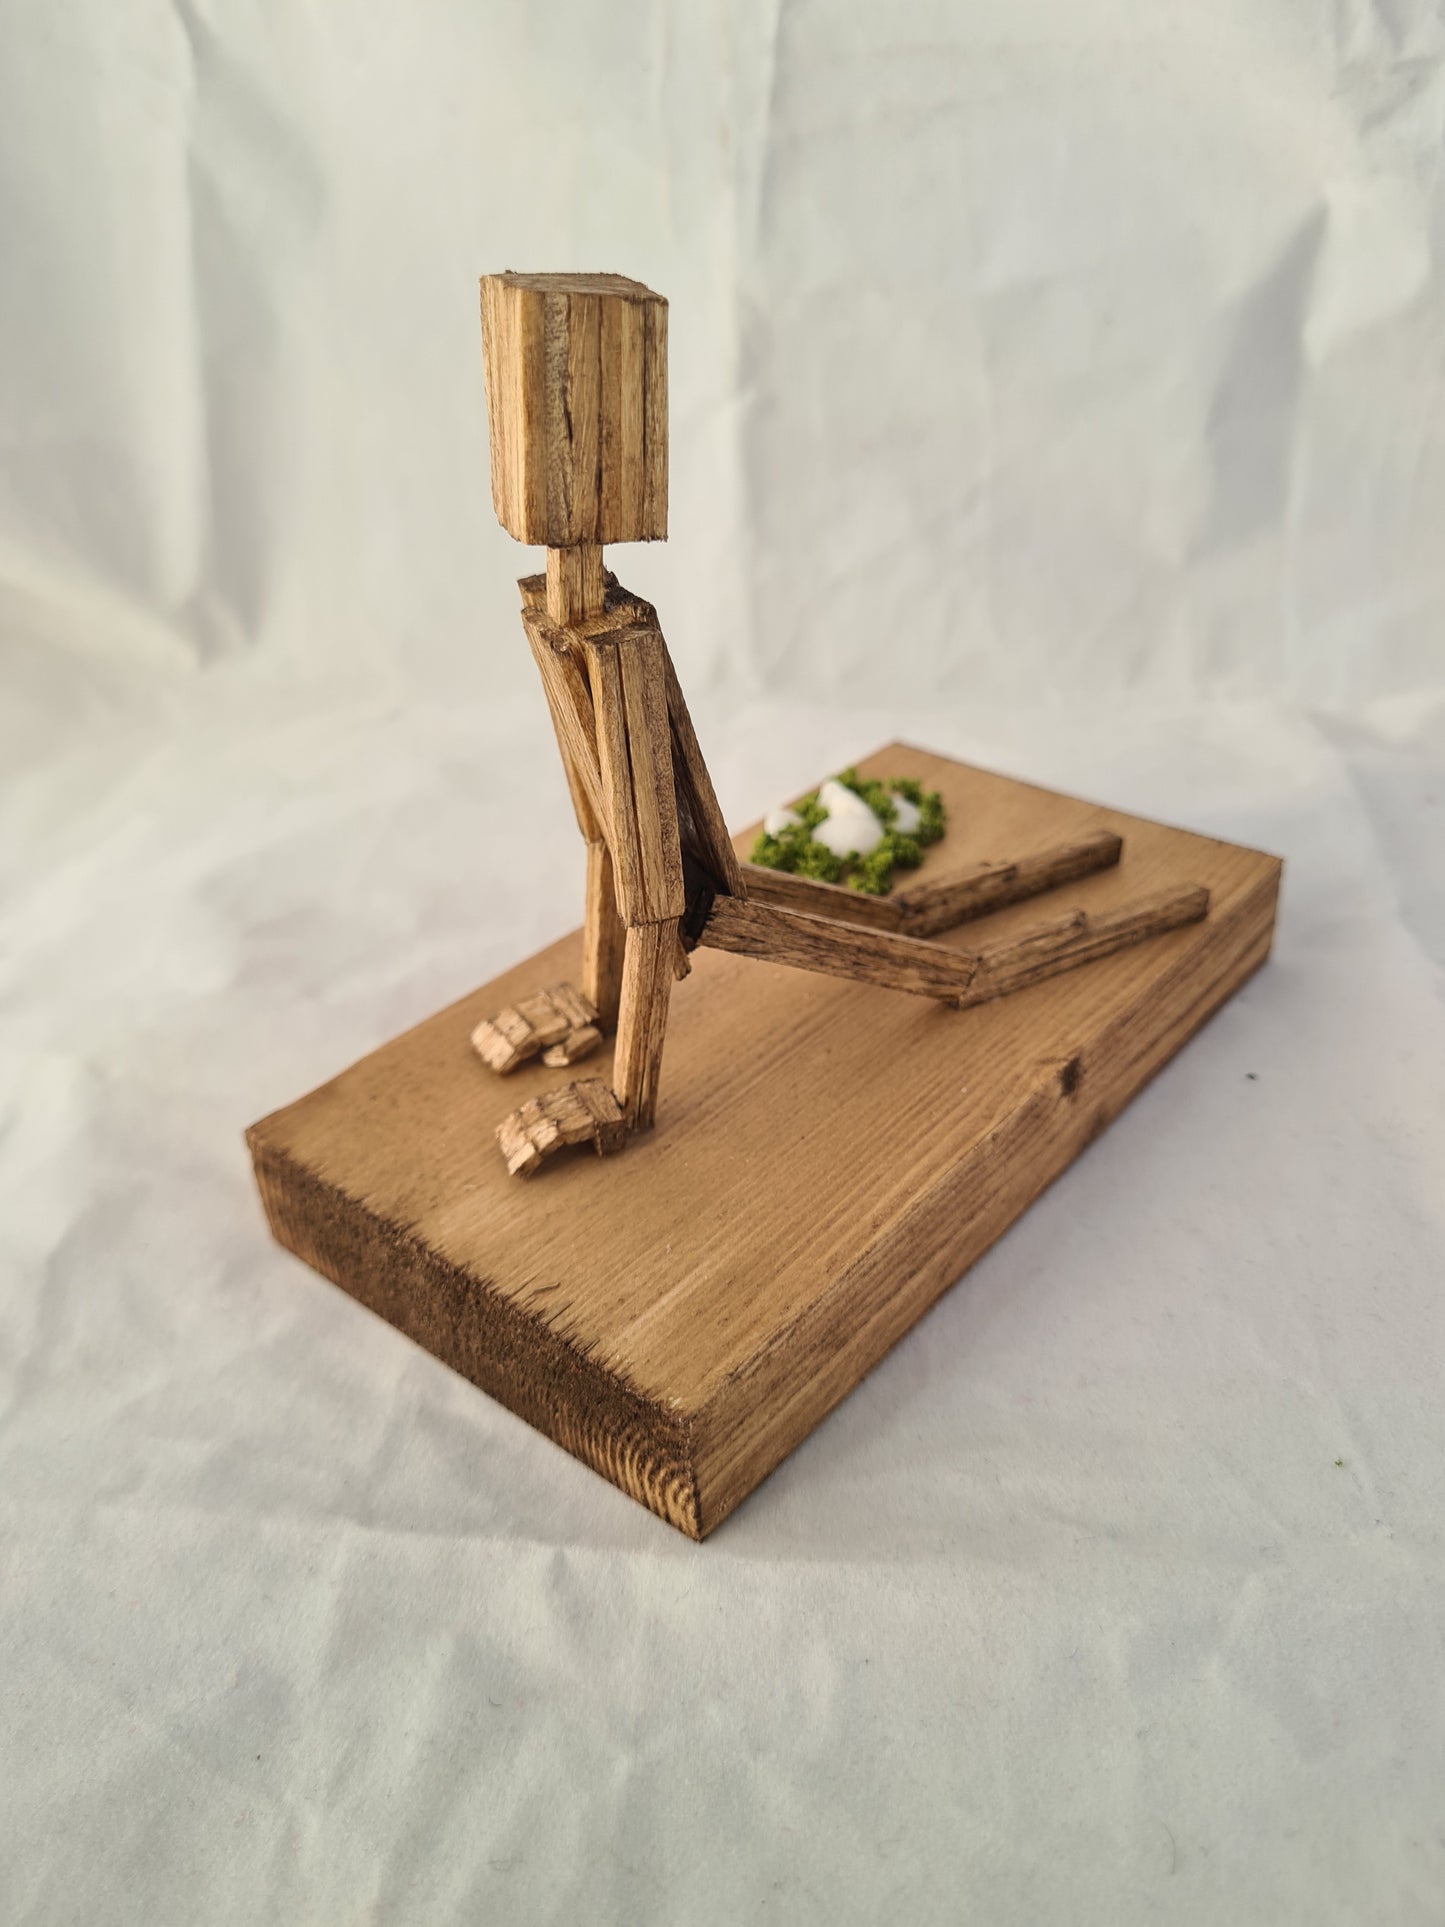 Cobra Pose - Handcrafted Wooden Matchstick Figures - Gifts, Ornaments and Decor By Tiggidy Designs